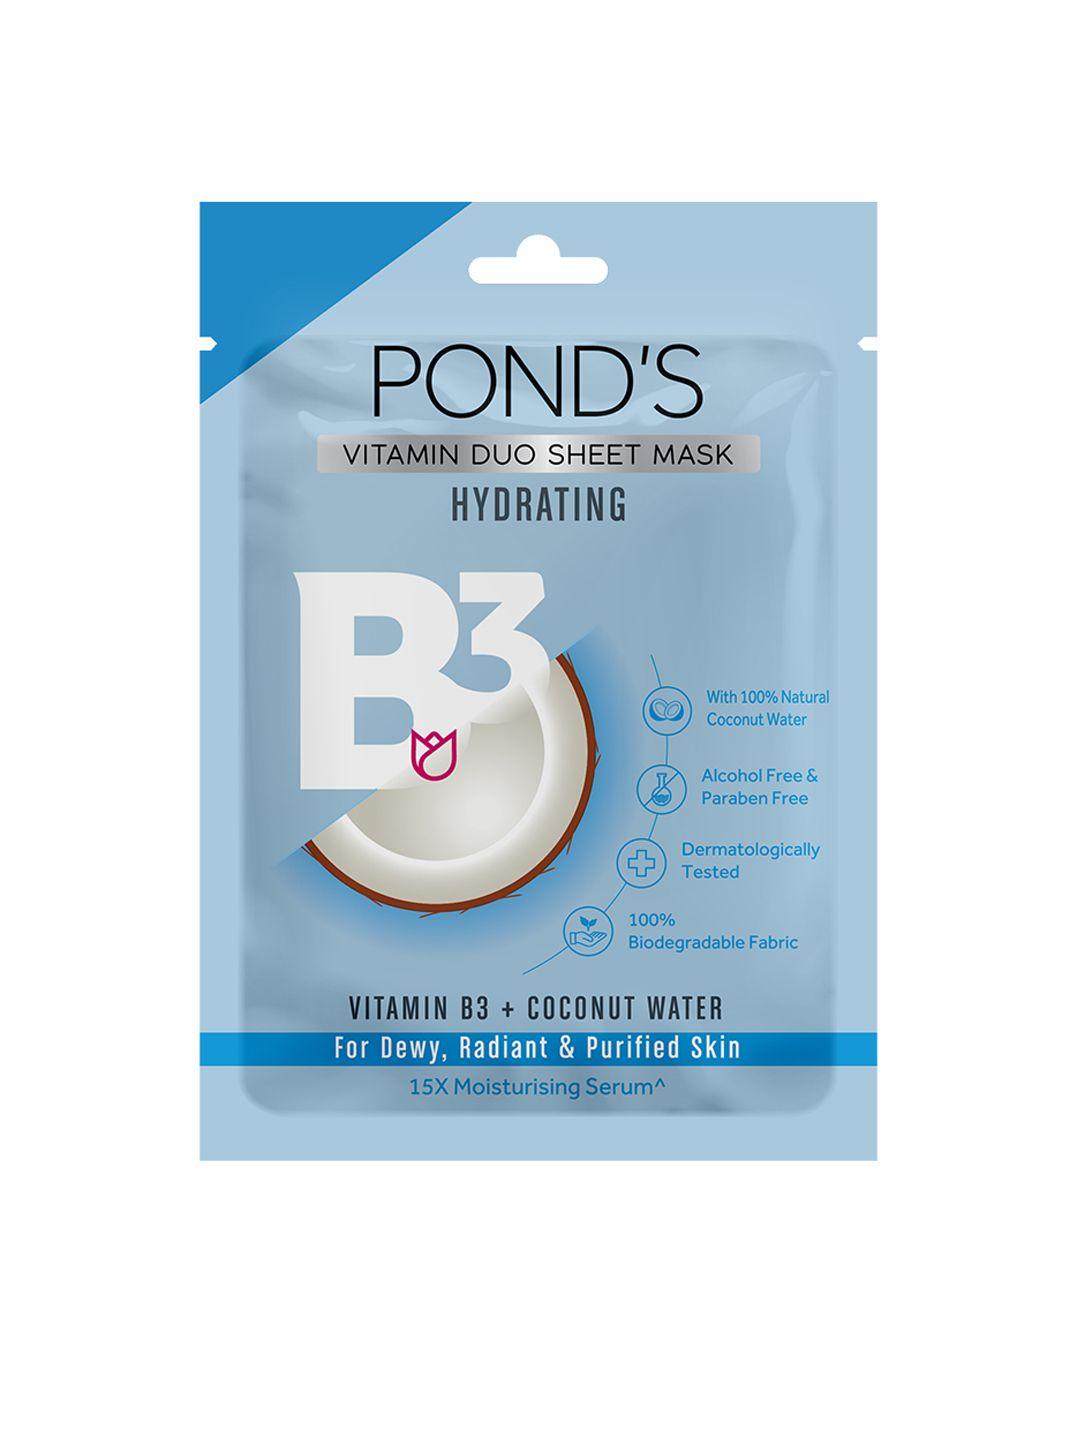 Ponds Vitamin B3 + Coconut Water Hydrating Sheet Mask For Dewy & Radiant Skin 25 ml